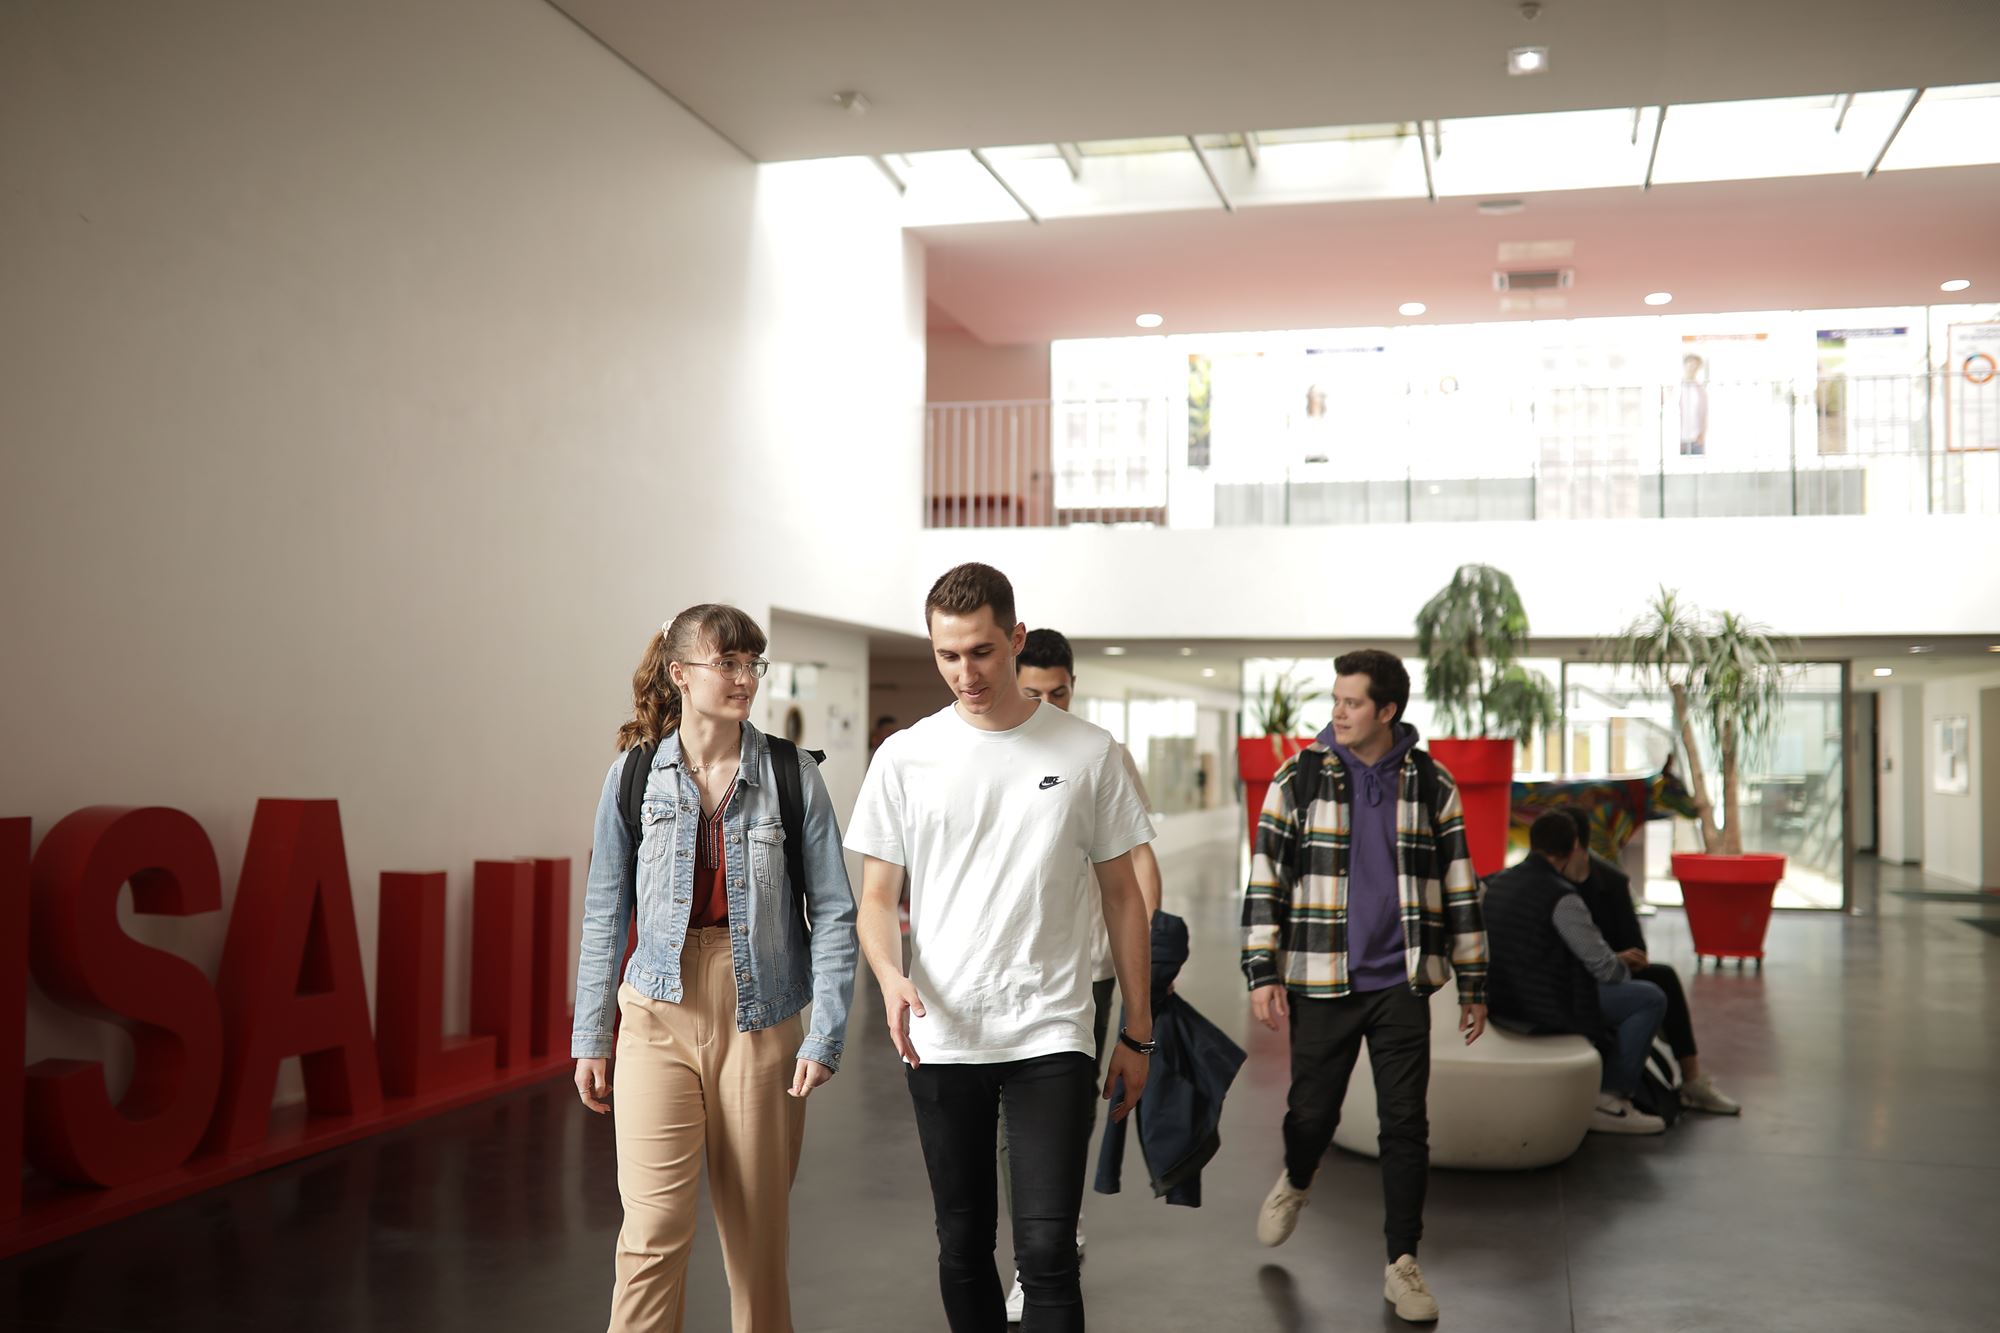 Students walking in the building